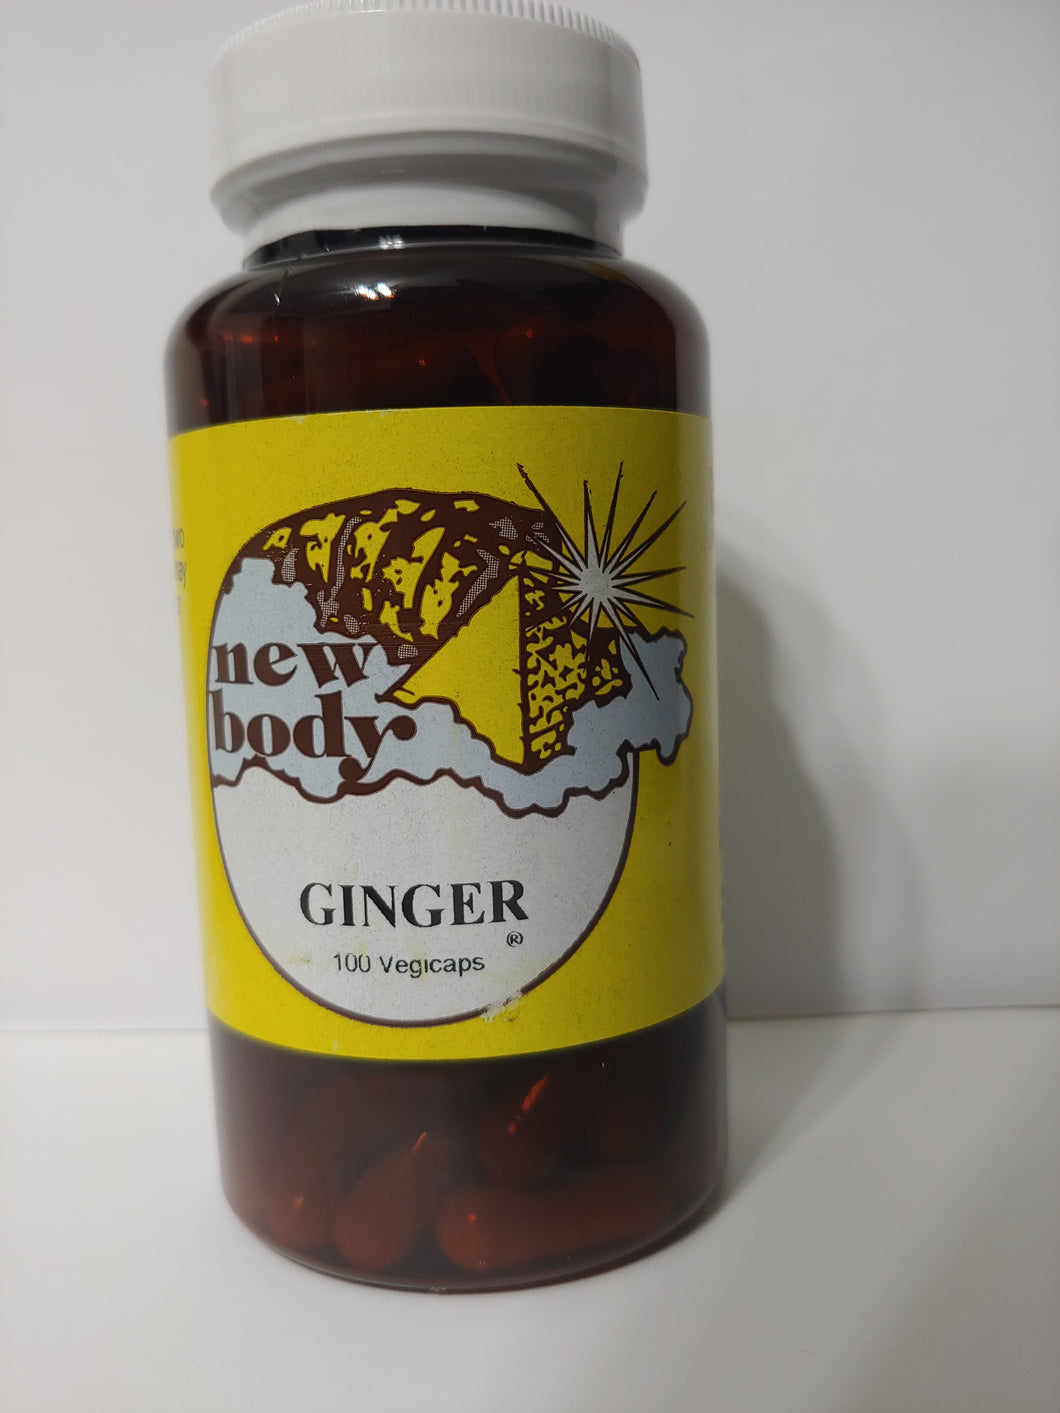 New Body Products Ginger 100 Vegicaps This Product Contains No Fillers, Binders, or Additives